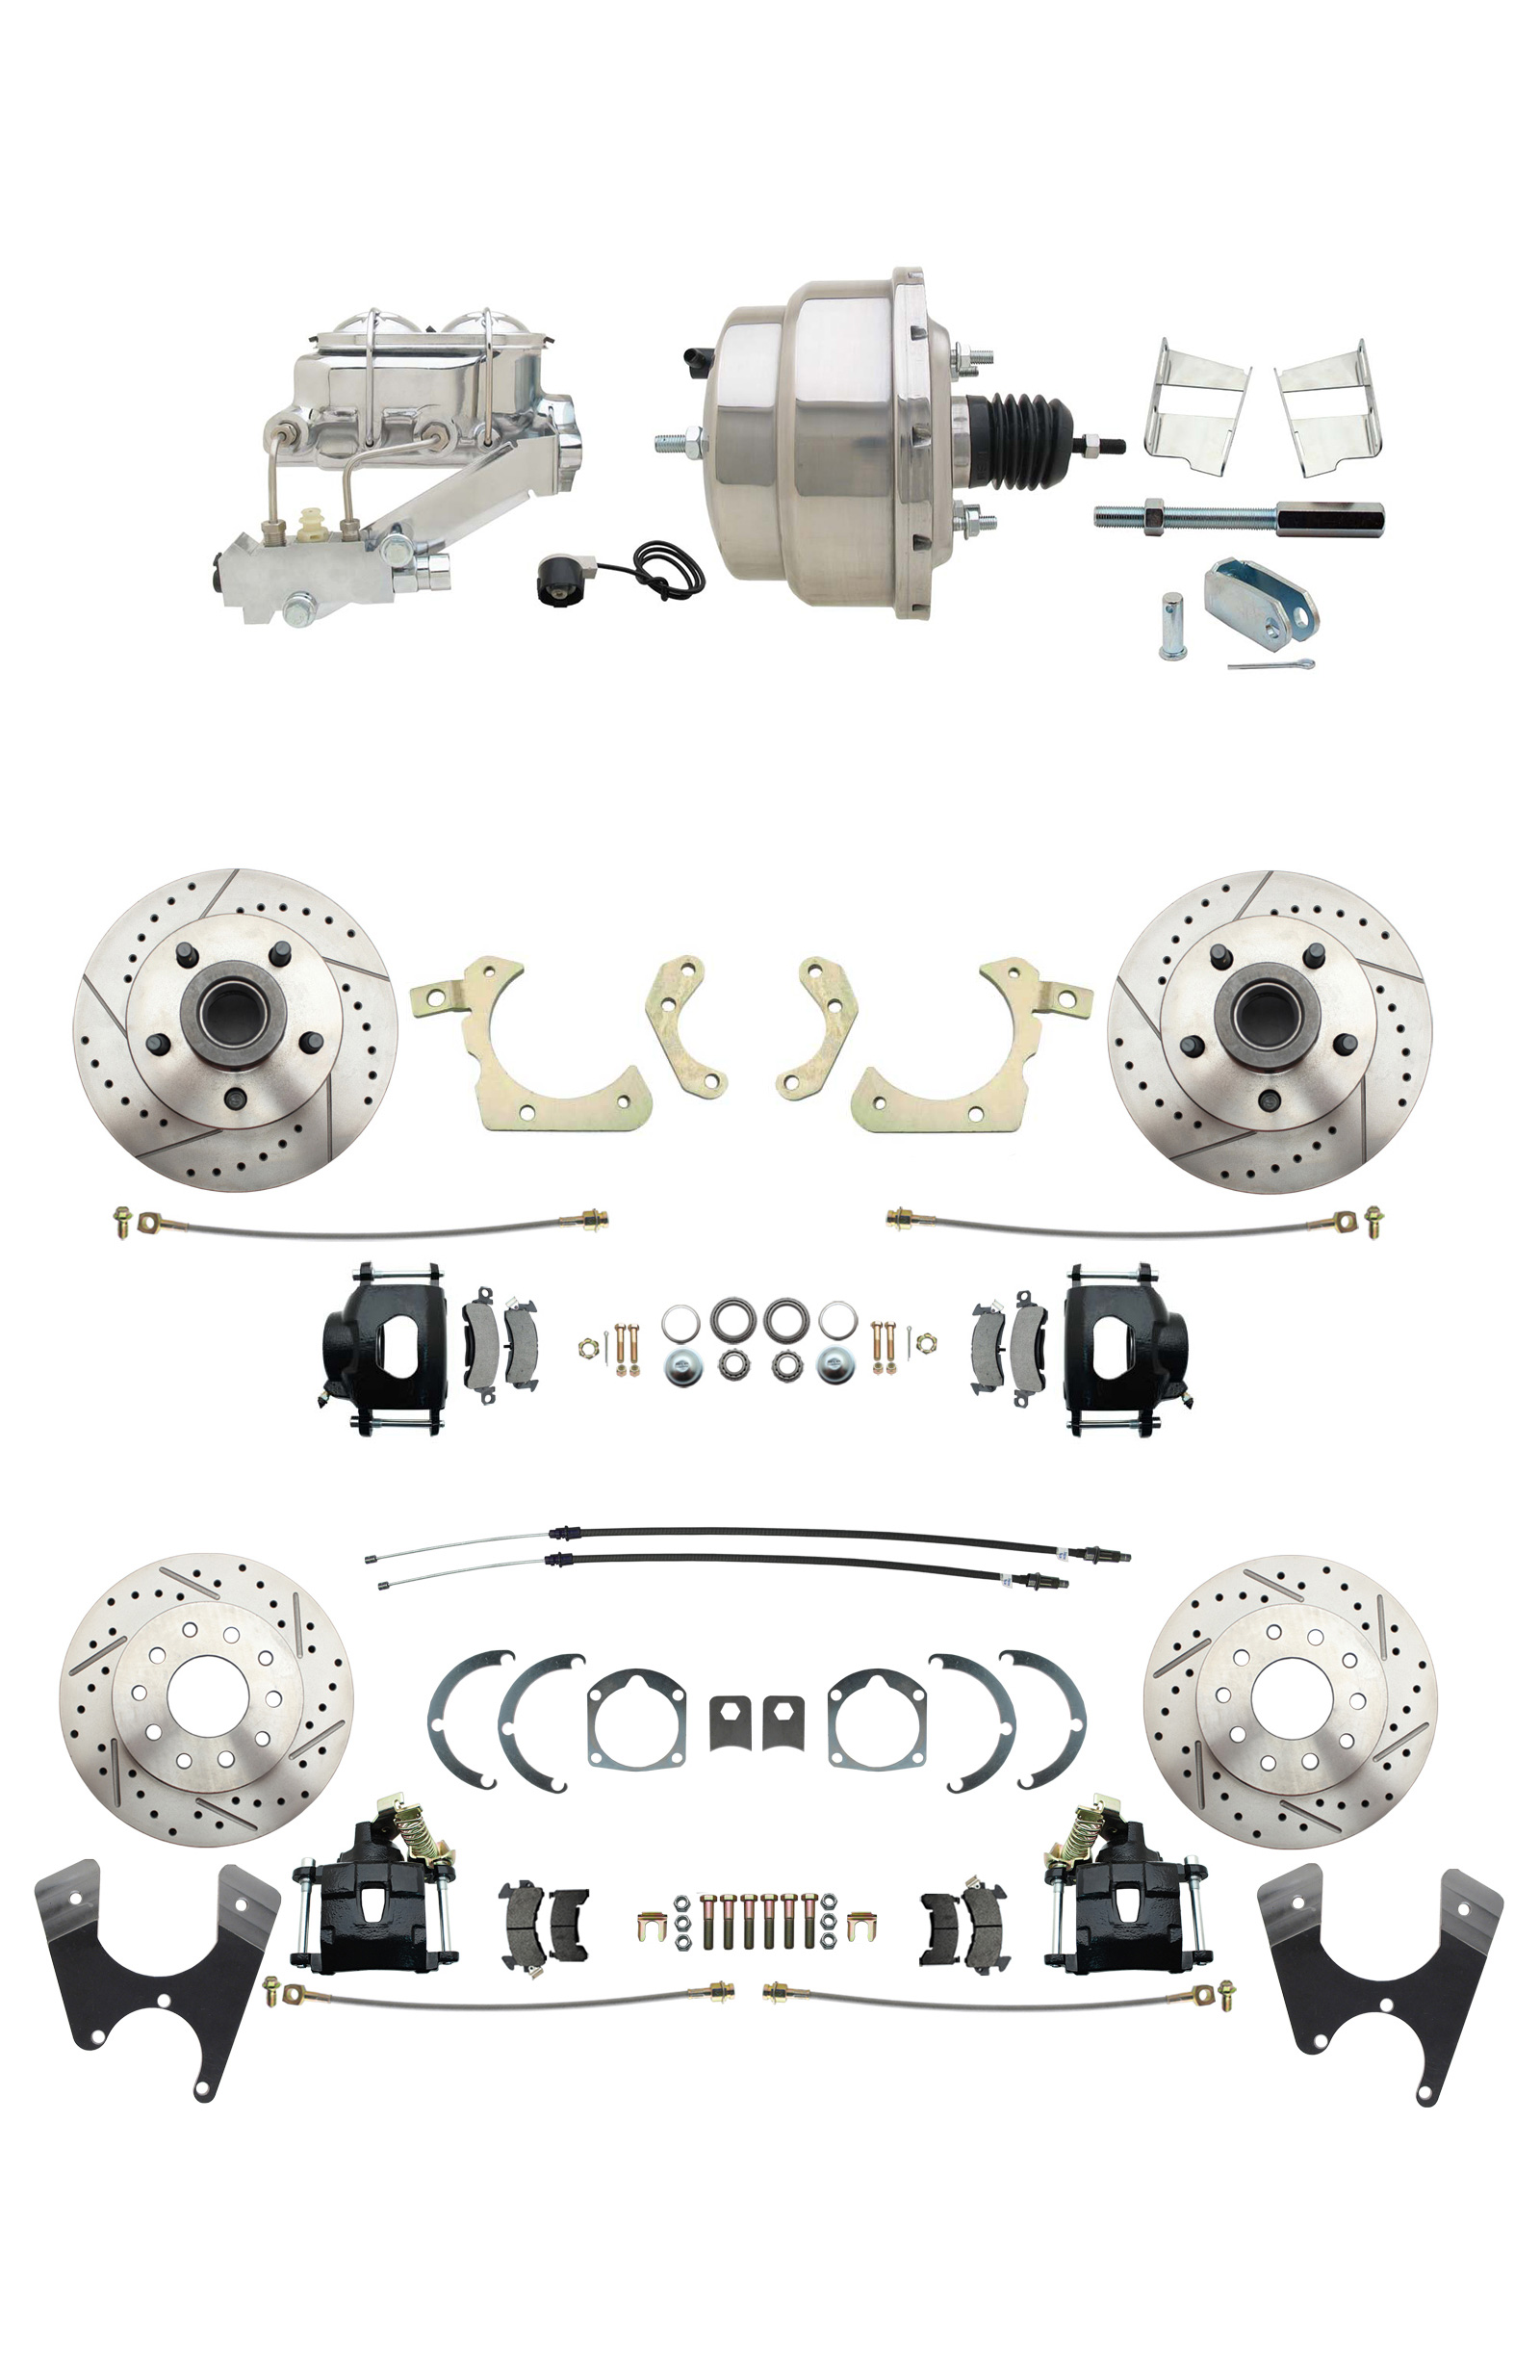 1959-1964 GM Full Size Front & Rear Power Disc Brake Kit Black Powder Coated Calipers Drilled/Slotted Rotors (Impala, Bel Air, Biscayne) & 8 Dual Chrome Booster Conversion Kit W/ Chrome Master Cylinder Left Mount Disc/